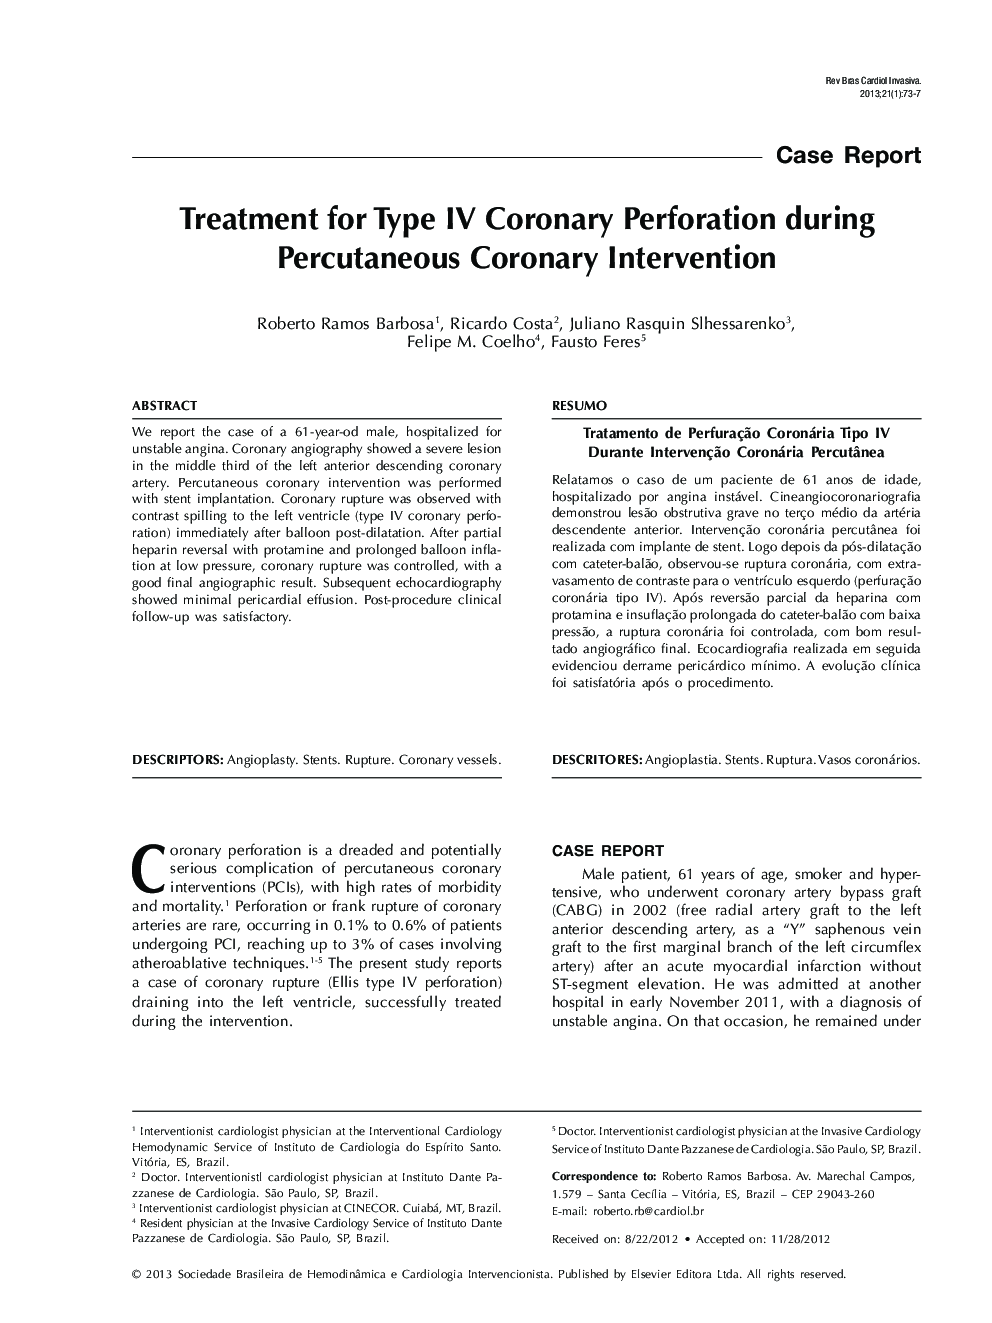 Treatment for Type IV Coronary Perforation during Percutaneous Coronary Intervention